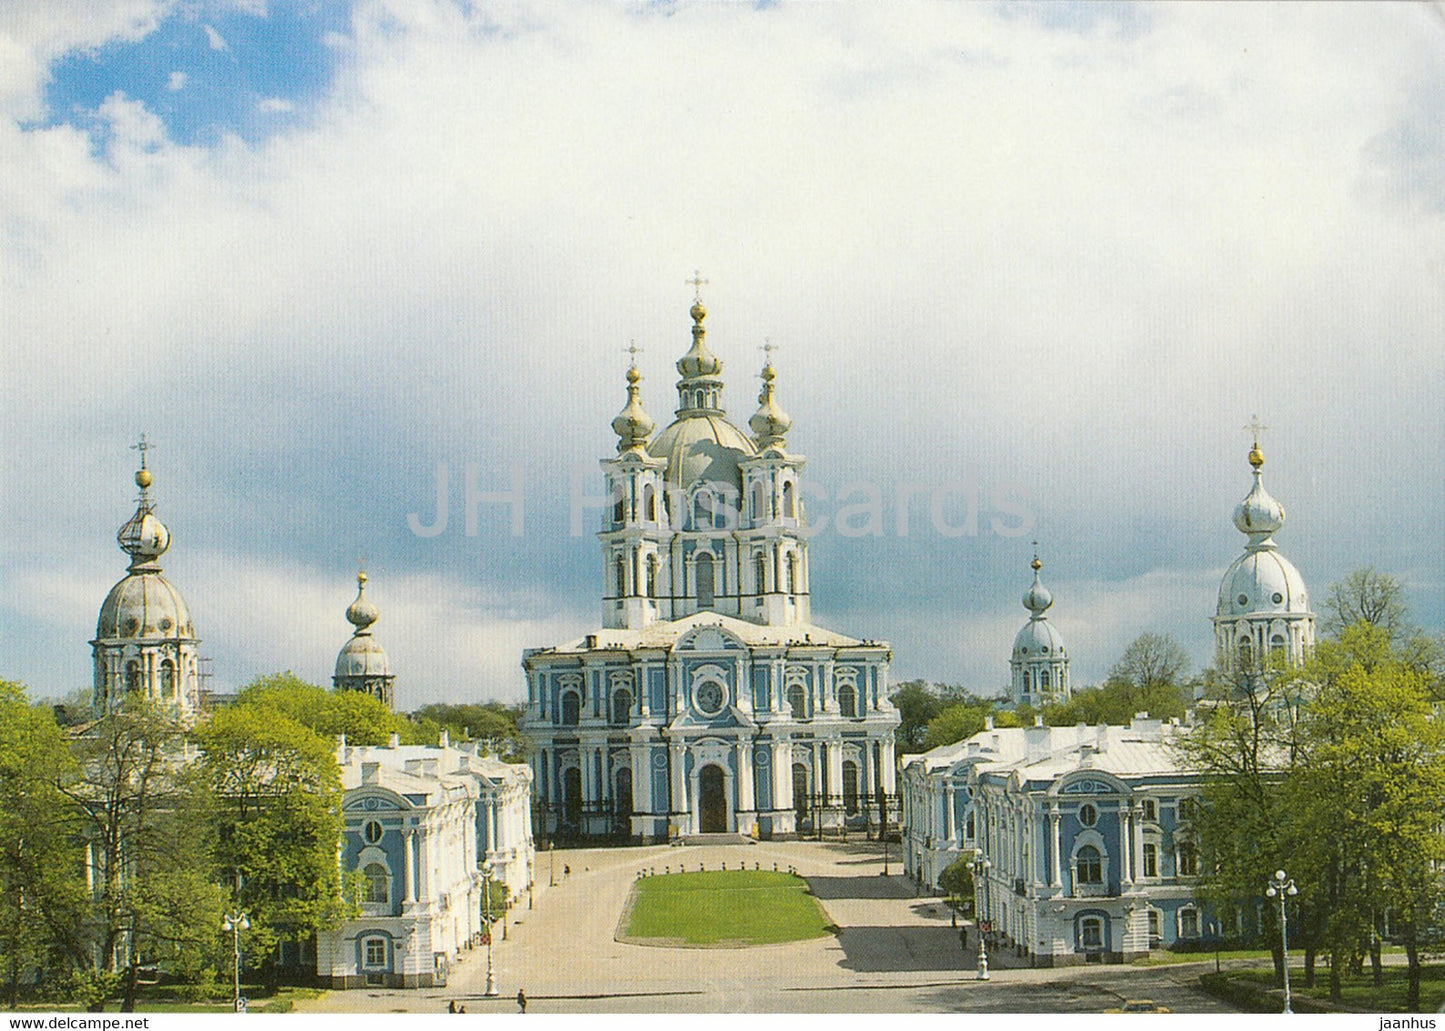 Leningrad - St Petersburg - The Ensemble of the Smolny Cathedral - Russia - unused - JH Postcards